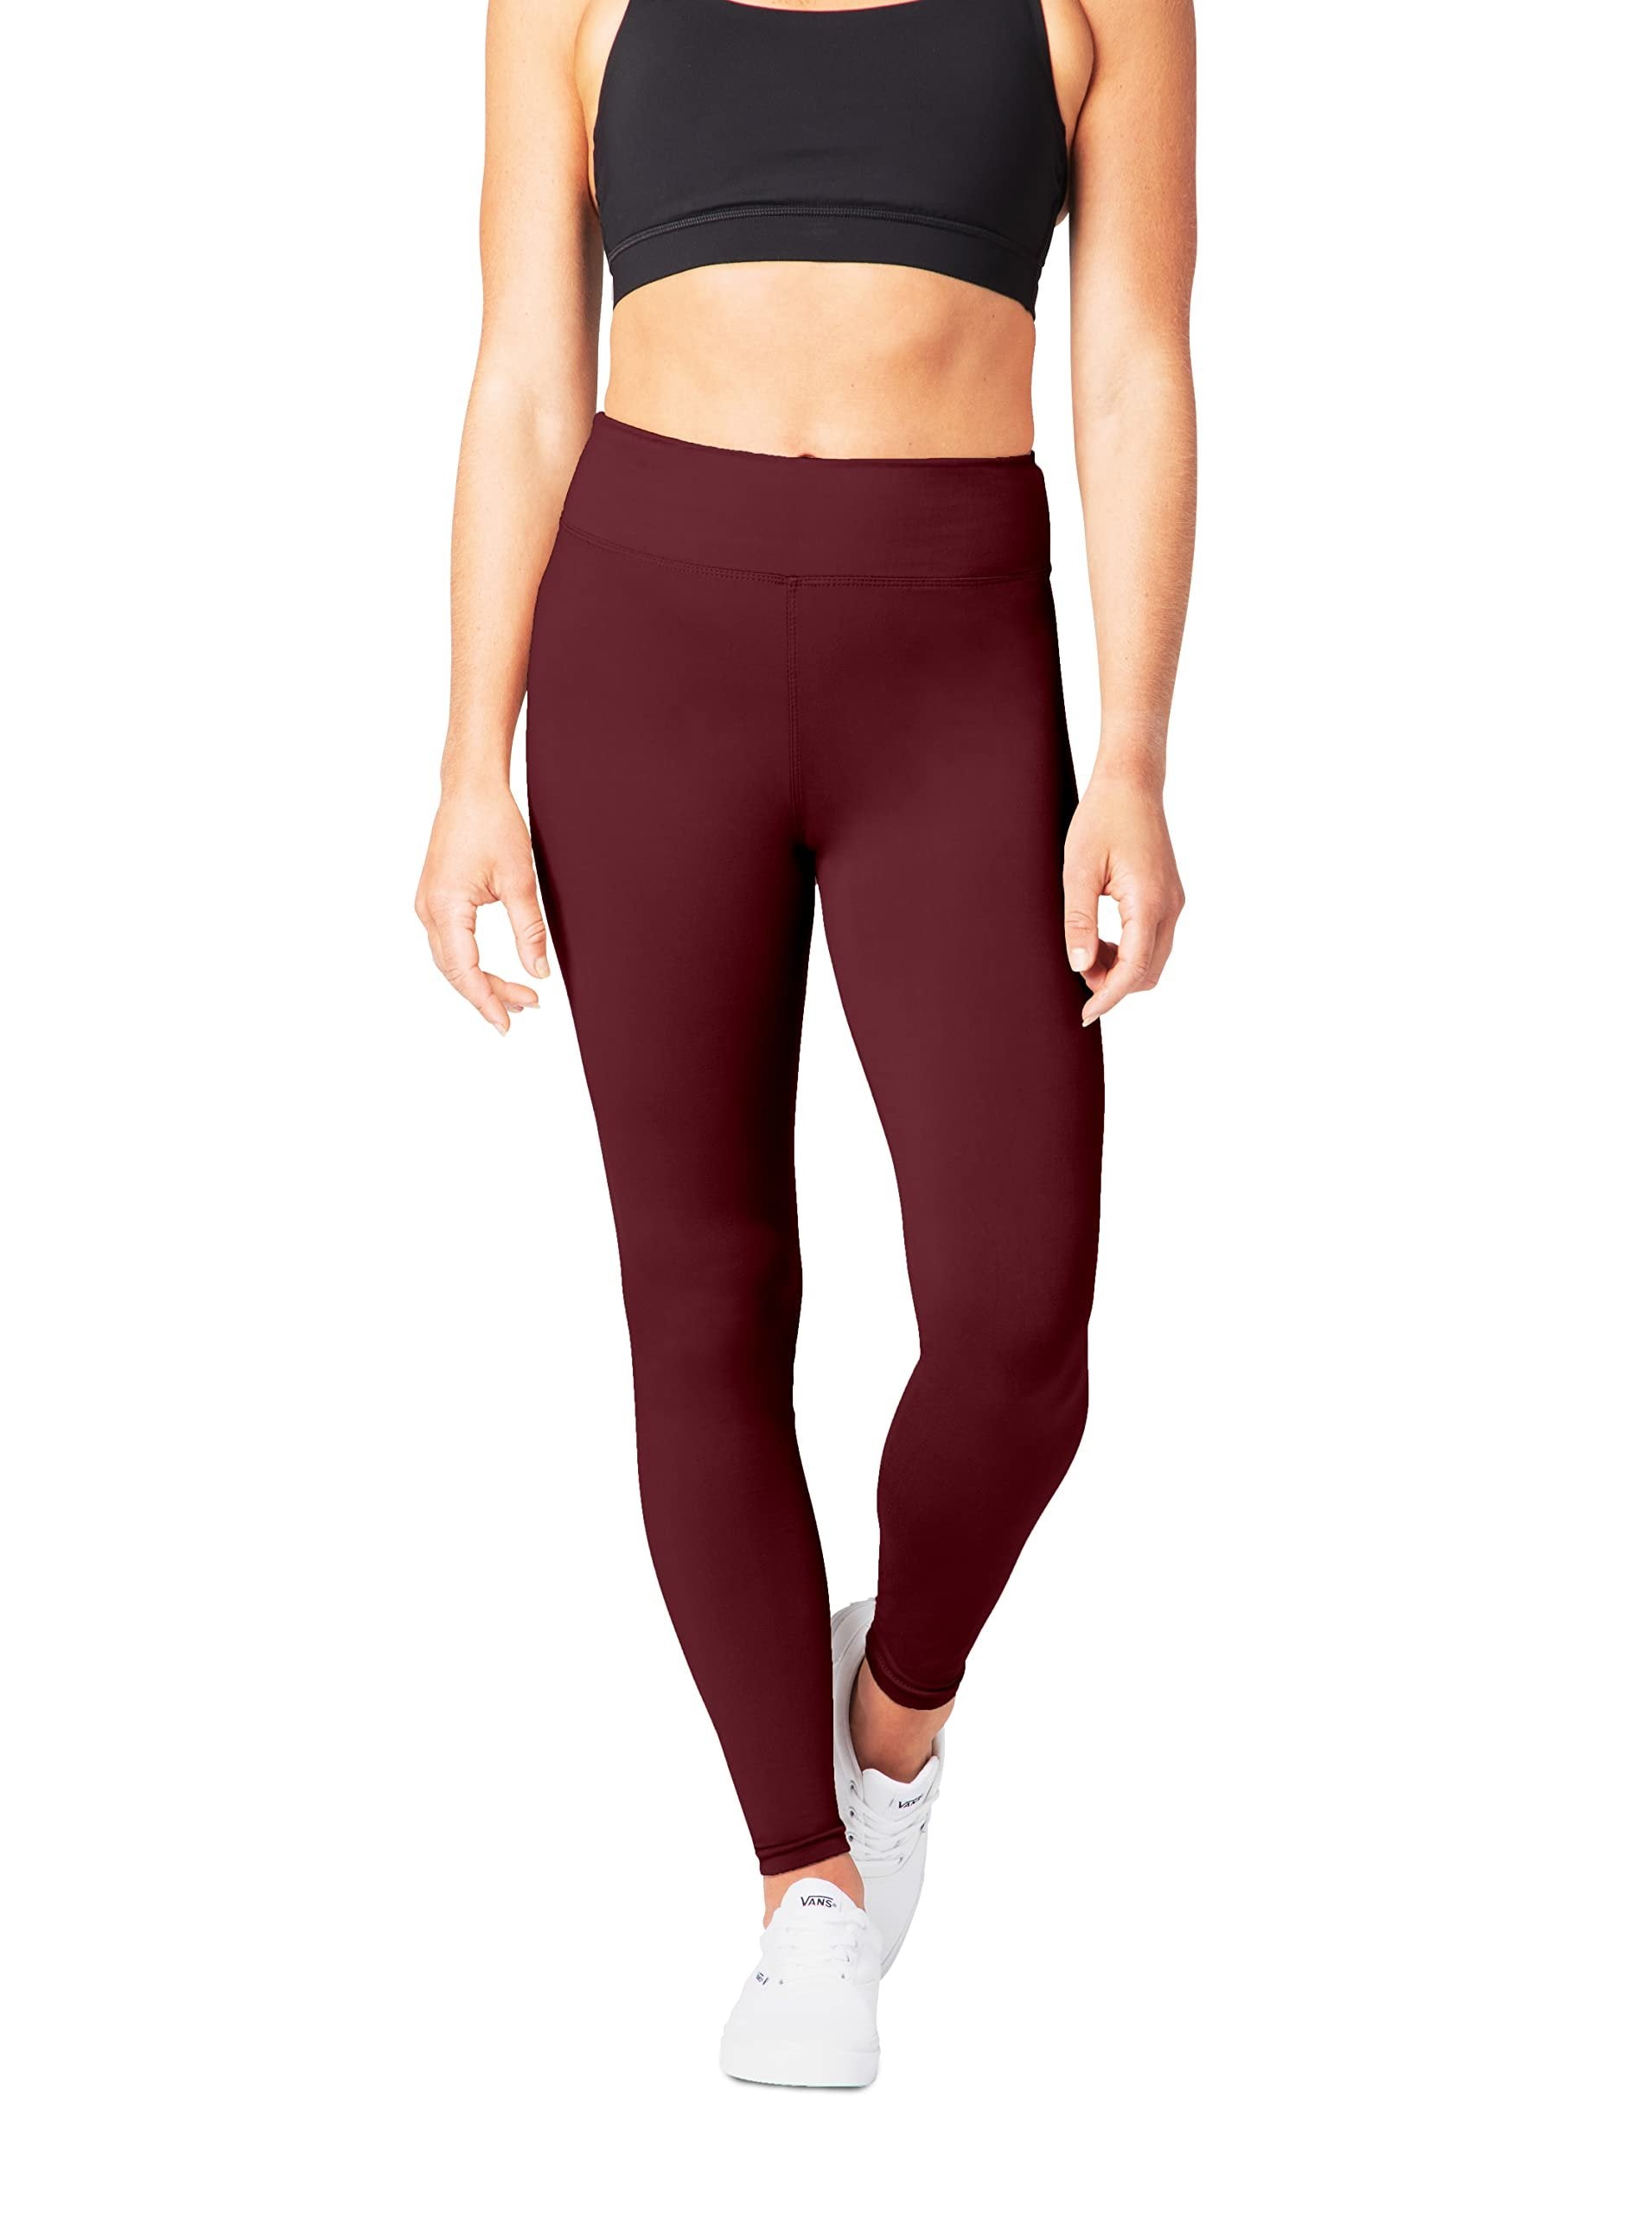 SATINA High Waisted Burgundy Leggings - One Size - Yoga & Workout Leggings for Women with 3 Inch Waistband - Free Shipping & Returns